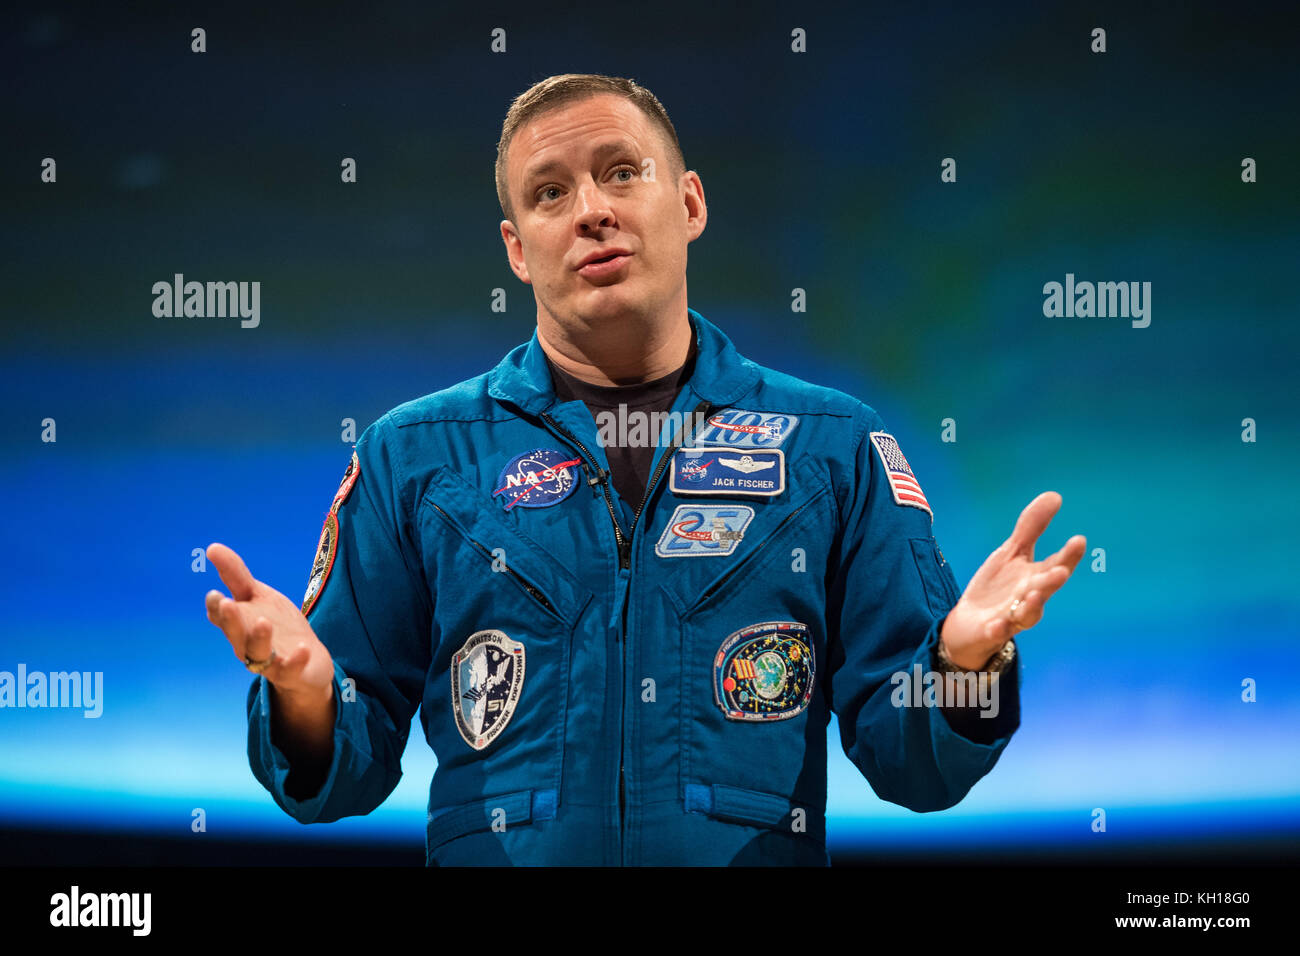 NASA Expedition 51 and Expedition 52 prime crew astronaut Jack Fischer speaks about his time onboard the International Space Station at the Smithsonian National Air and Space Museum November 3, 2017 in Washington, DC.   (photo by Aubrey Gemignani via Planetpix) Stock Photo